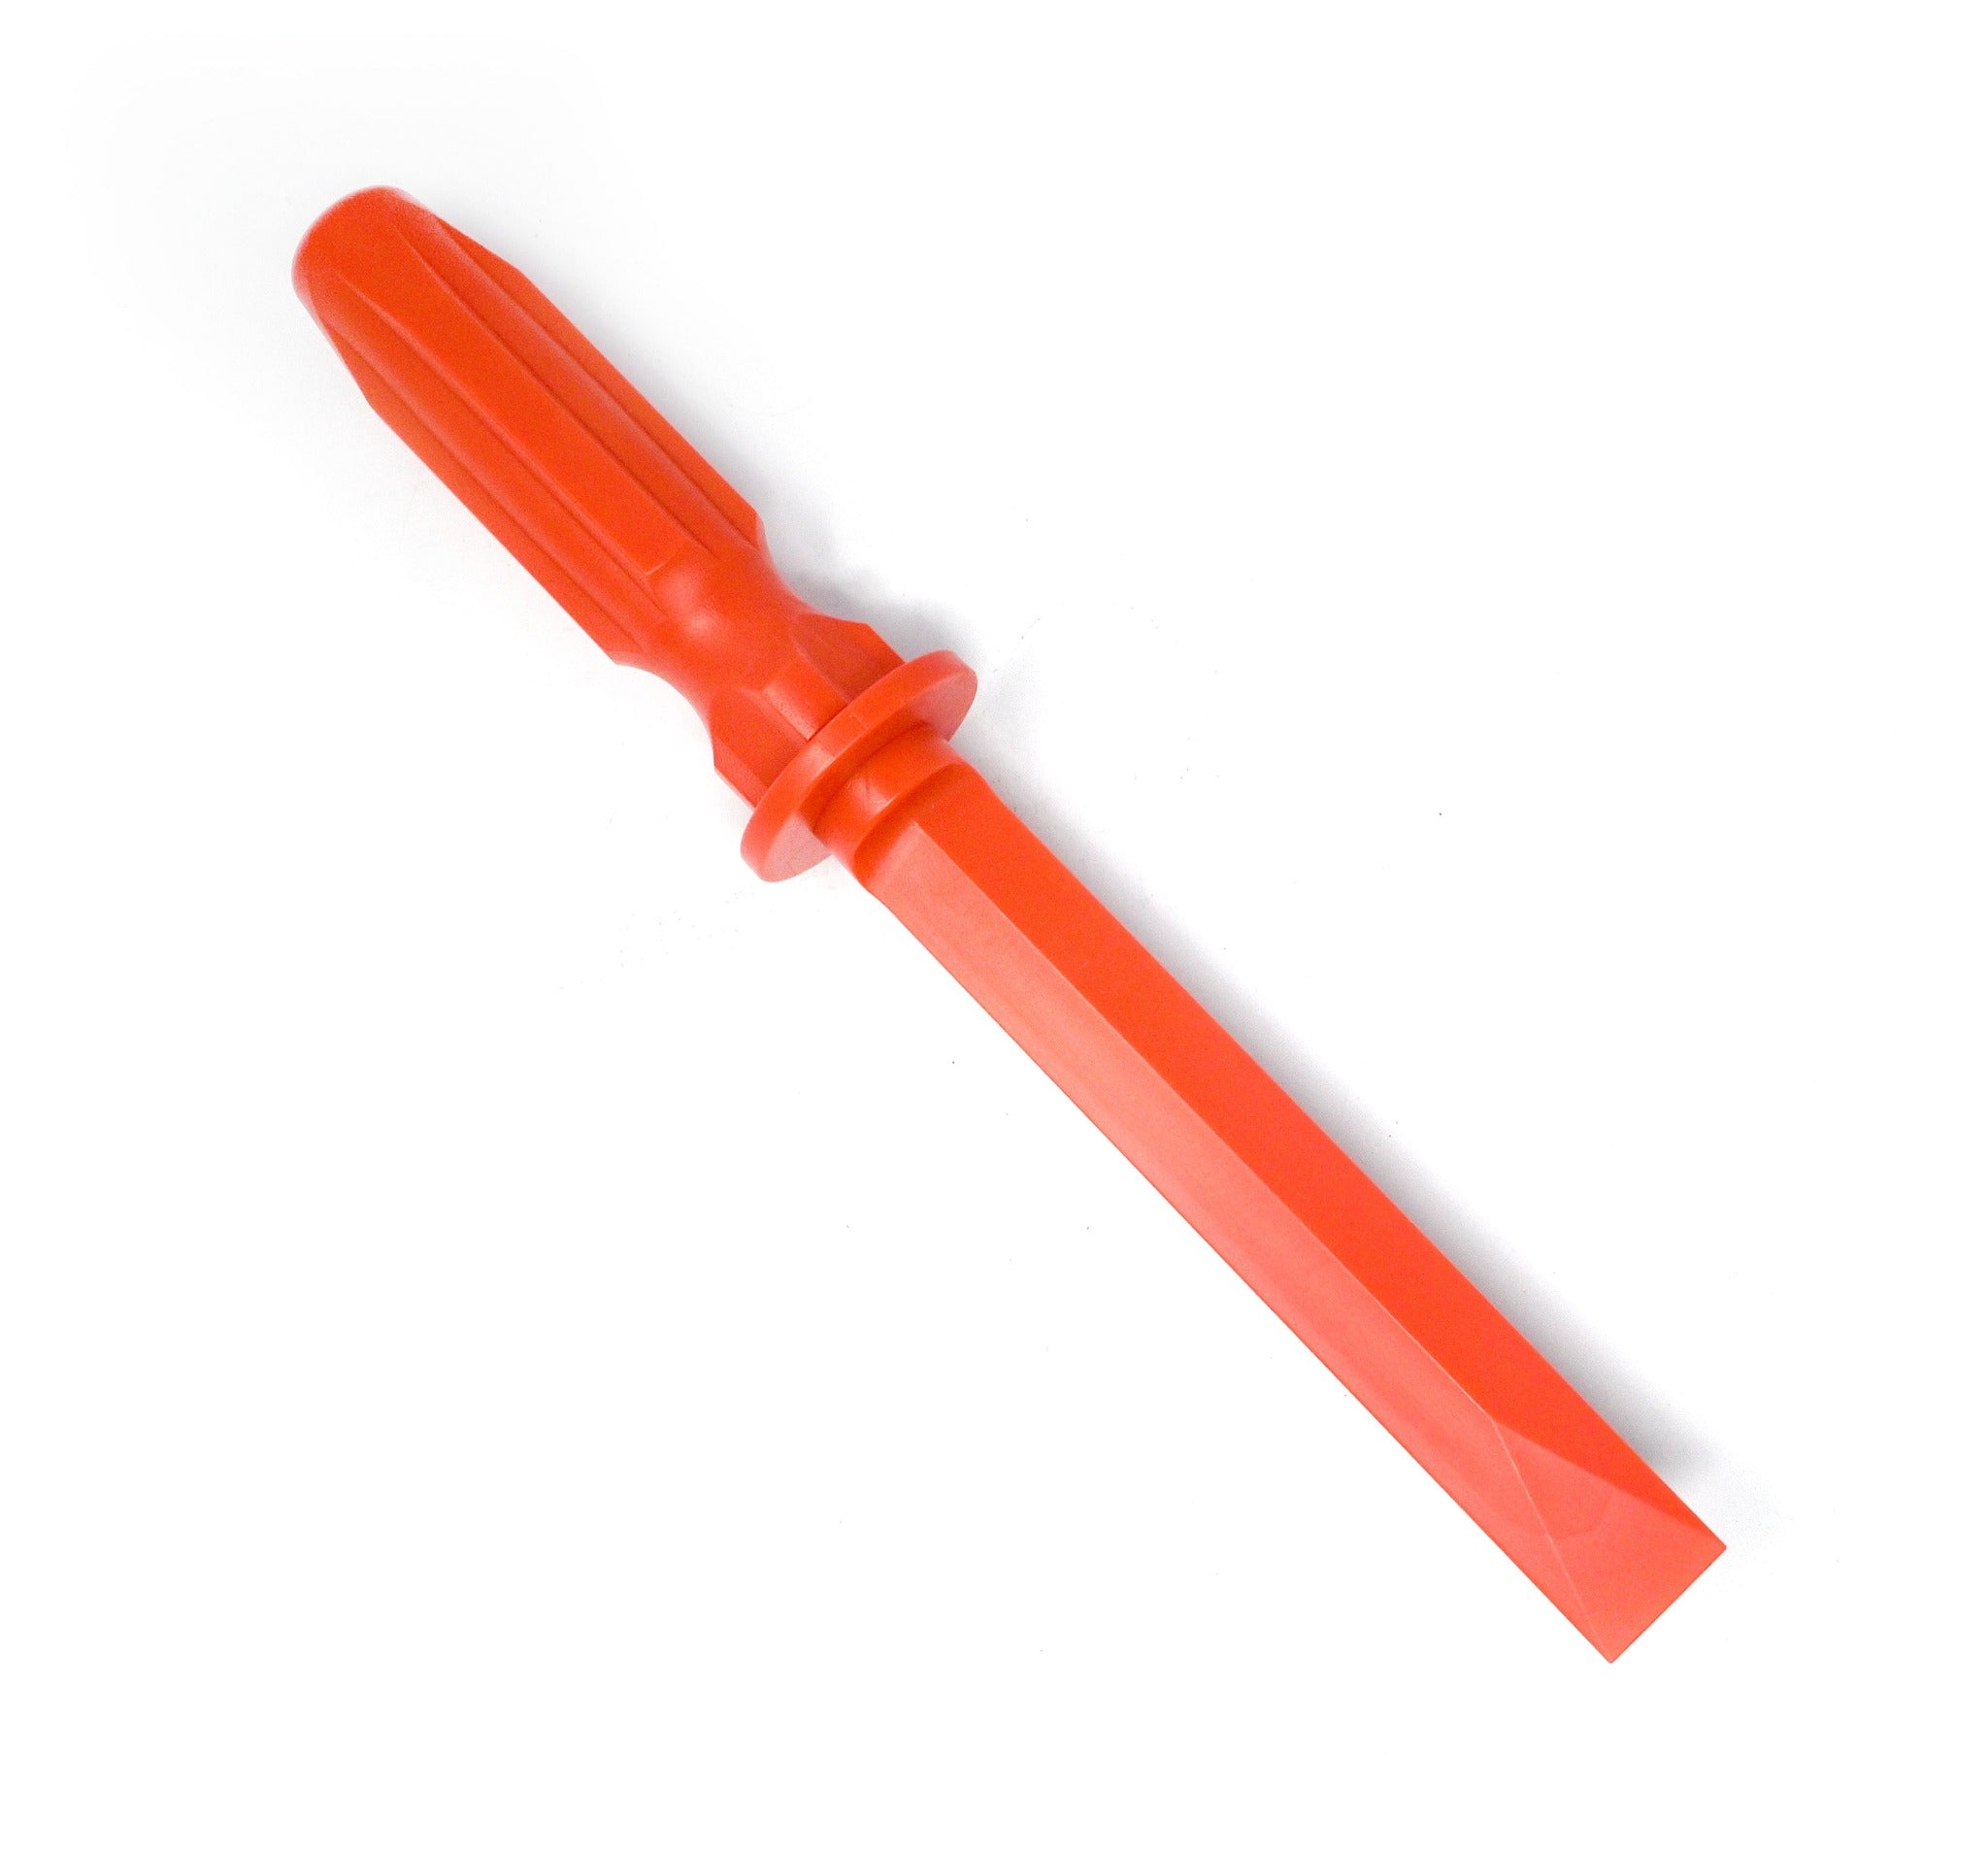 Wheel Weight Plastic Removal Tool/Scraper   Red